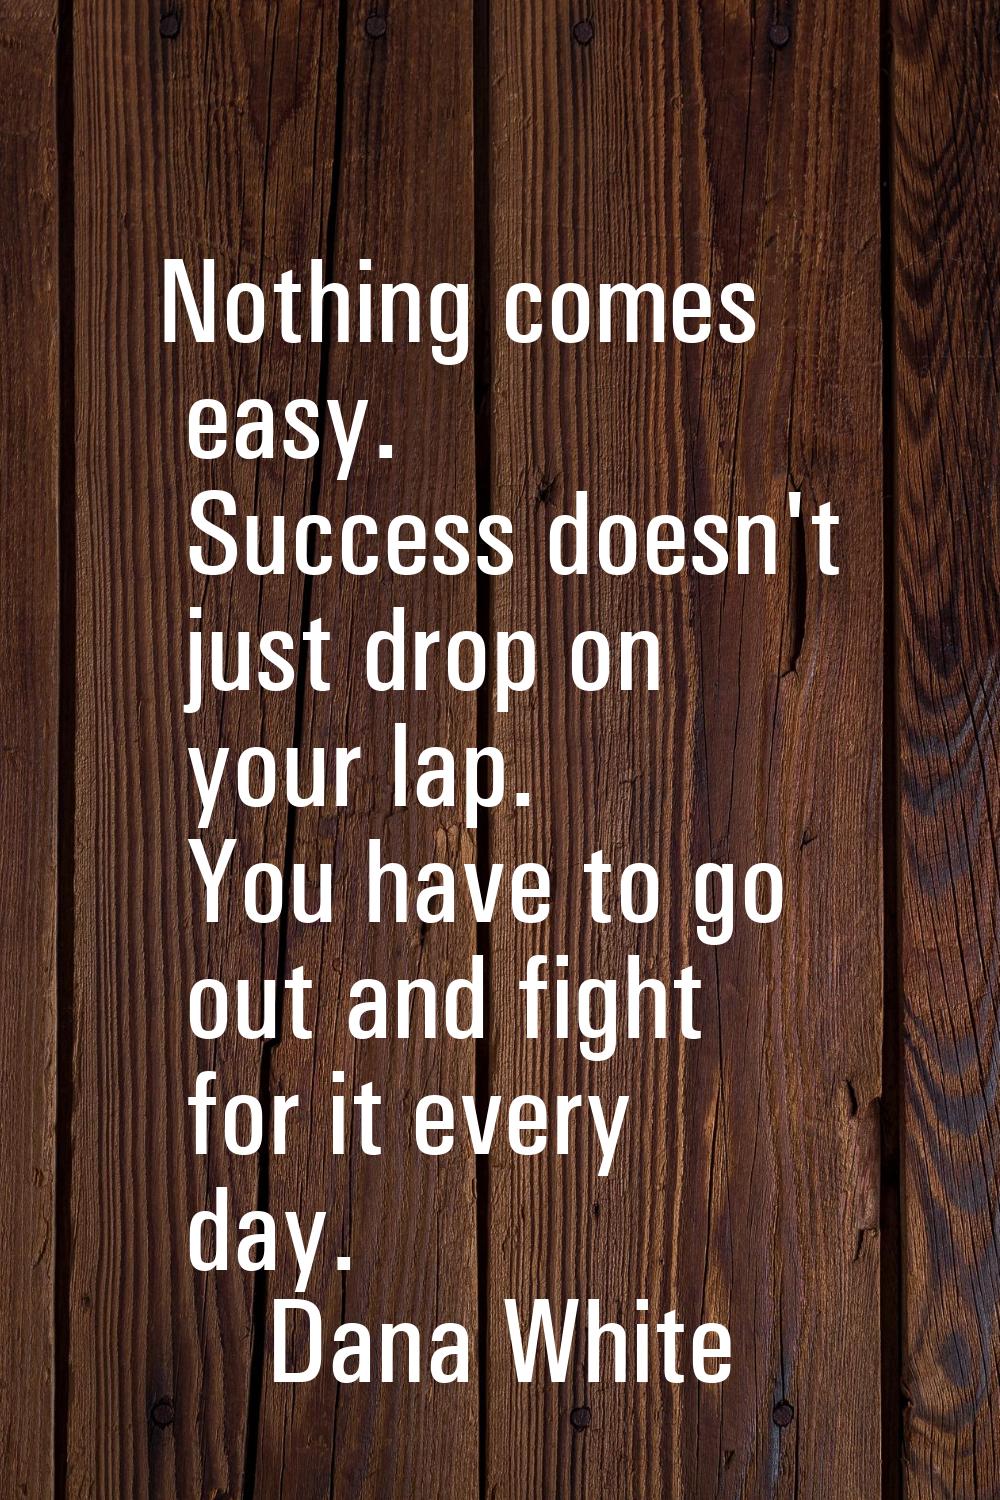 Nothing comes easy. Success doesn't just drop on your lap. You have to go out and fight for it ever